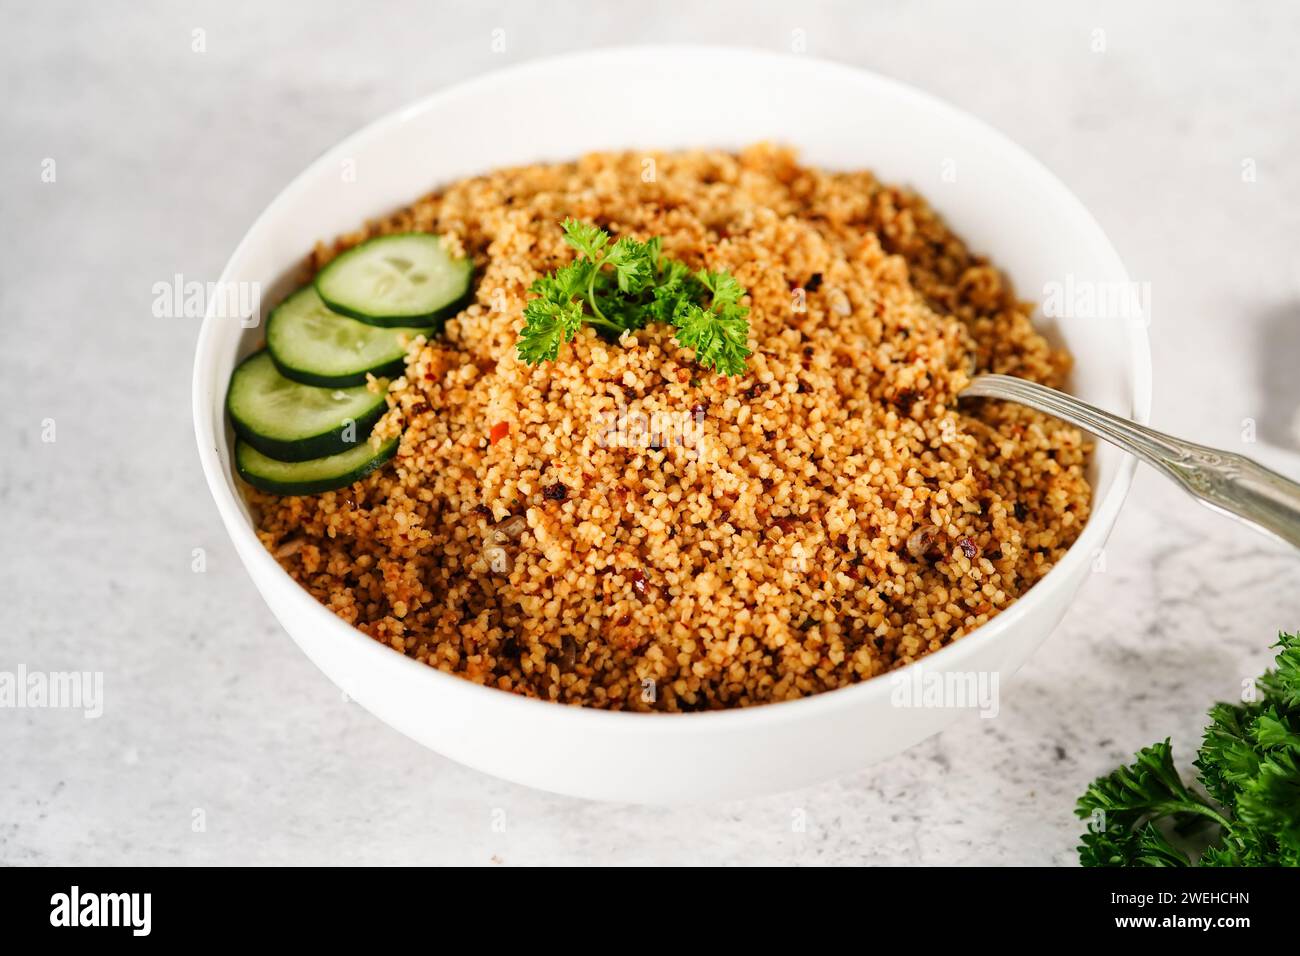 Homemade Moroccan couscous served in a bowl, selective focus Stock Photo